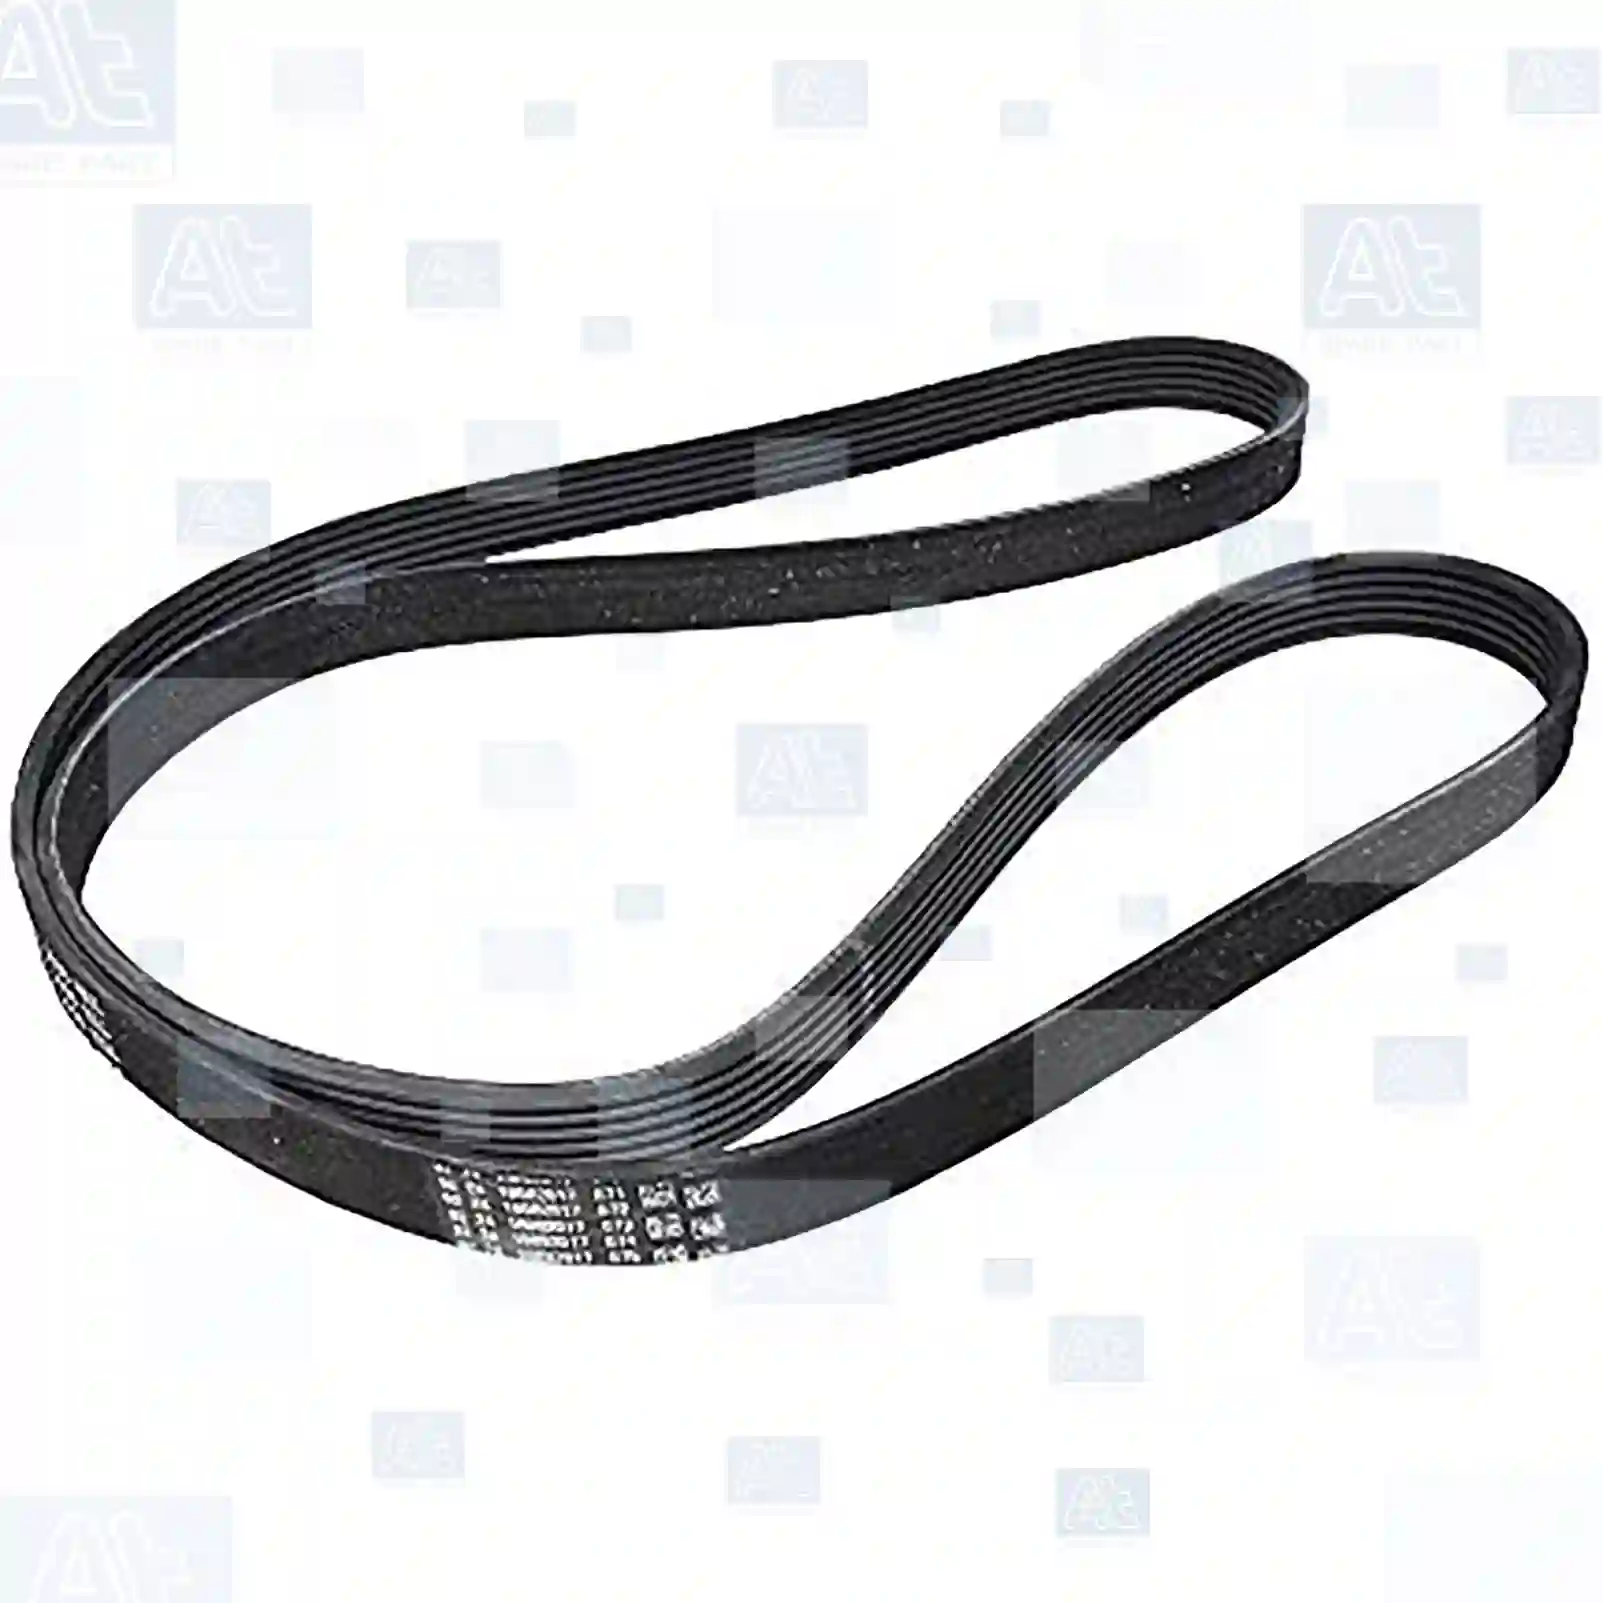 Multiribbed belt, 77707966, 074260849AB, 078903137K, 078903137P, 5103565AA, 5127258AA, 5103565AA, 90448002, 90490781, 90500354, 90501385, 90501385, 25212-3C120, XW4E8620AD, 4638133, 53013298AB, 68045801AA, 90916-02462, 90916-02583, 90916-02584, LF4J15909C, LFA1159099F, LFH115909B, 0019938696, 0129974892, 0149970692, 0149970792, 0149971792, 6119972292, 6119973092, 1340615, 1854714, 1854723, 99610215193, 4623948, LFH11-5909B, 90916-02462, 90916-02583, 90916-02584, 074260843, 074260849L, 5X0260849A, ZG01585-0008 ||  77707966 At Spare Part | Engine, Accelerator Pedal, Camshaft, Connecting Rod, Crankcase, Crankshaft, Cylinder Head, Engine Suspension Mountings, Exhaust Manifold, Exhaust Gas Recirculation, Filter Kits, Flywheel Housing, General Overhaul Kits, Engine, Intake Manifold, Oil Cleaner, Oil Cooler, Oil Filter, Oil Pump, Oil Sump, Piston & Liner, Sensor & Switch, Timing Case, Turbocharger, Cooling System, Belt Tensioner, Coolant Filter, Coolant Pipe, Corrosion Prevention Agent, Drive, Expansion Tank, Fan, Intercooler, Monitors & Gauges, Radiator, Thermostat, V-Belt / Timing belt, Water Pump, Fuel System, Electronical Injector Unit, Feed Pump, Fuel Filter, cpl., Fuel Gauge Sender,  Fuel Line, Fuel Pump, Fuel Tank, Injection Line Kit, Injection Pump, Exhaust System, Clutch & Pedal, Gearbox, Propeller Shaft, Axles, Brake System, Hubs & Wheels, Suspension, Leaf Spring, Universal Parts / Accessories, Steering, Electrical System, Cabin Multiribbed belt, 77707966, 074260849AB, 078903137K, 078903137P, 5103565AA, 5127258AA, 5103565AA, 90448002, 90490781, 90500354, 90501385, 90501385, 25212-3C120, XW4E8620AD, 4638133, 53013298AB, 68045801AA, 90916-02462, 90916-02583, 90916-02584, LF4J15909C, LFA1159099F, LFH115909B, 0019938696, 0129974892, 0149970692, 0149970792, 0149971792, 6119972292, 6119973092, 1340615, 1854714, 1854723, 99610215193, 4623948, LFH11-5909B, 90916-02462, 90916-02583, 90916-02584, 074260843, 074260849L, 5X0260849A, ZG01585-0008 ||  77707966 At Spare Part | Engine, Accelerator Pedal, Camshaft, Connecting Rod, Crankcase, Crankshaft, Cylinder Head, Engine Suspension Mountings, Exhaust Manifold, Exhaust Gas Recirculation, Filter Kits, Flywheel Housing, General Overhaul Kits, Engine, Intake Manifold, Oil Cleaner, Oil Cooler, Oil Filter, Oil Pump, Oil Sump, Piston & Liner, Sensor & Switch, Timing Case, Turbocharger, Cooling System, Belt Tensioner, Coolant Filter, Coolant Pipe, Corrosion Prevention Agent, Drive, Expansion Tank, Fan, Intercooler, Monitors & Gauges, Radiator, Thermostat, V-Belt / Timing belt, Water Pump, Fuel System, Electronical Injector Unit, Feed Pump, Fuel Filter, cpl., Fuel Gauge Sender,  Fuel Line, Fuel Pump, Fuel Tank, Injection Line Kit, Injection Pump, Exhaust System, Clutch & Pedal, Gearbox, Propeller Shaft, Axles, Brake System, Hubs & Wheels, Suspension, Leaf Spring, Universal Parts / Accessories, Steering, Electrical System, Cabin